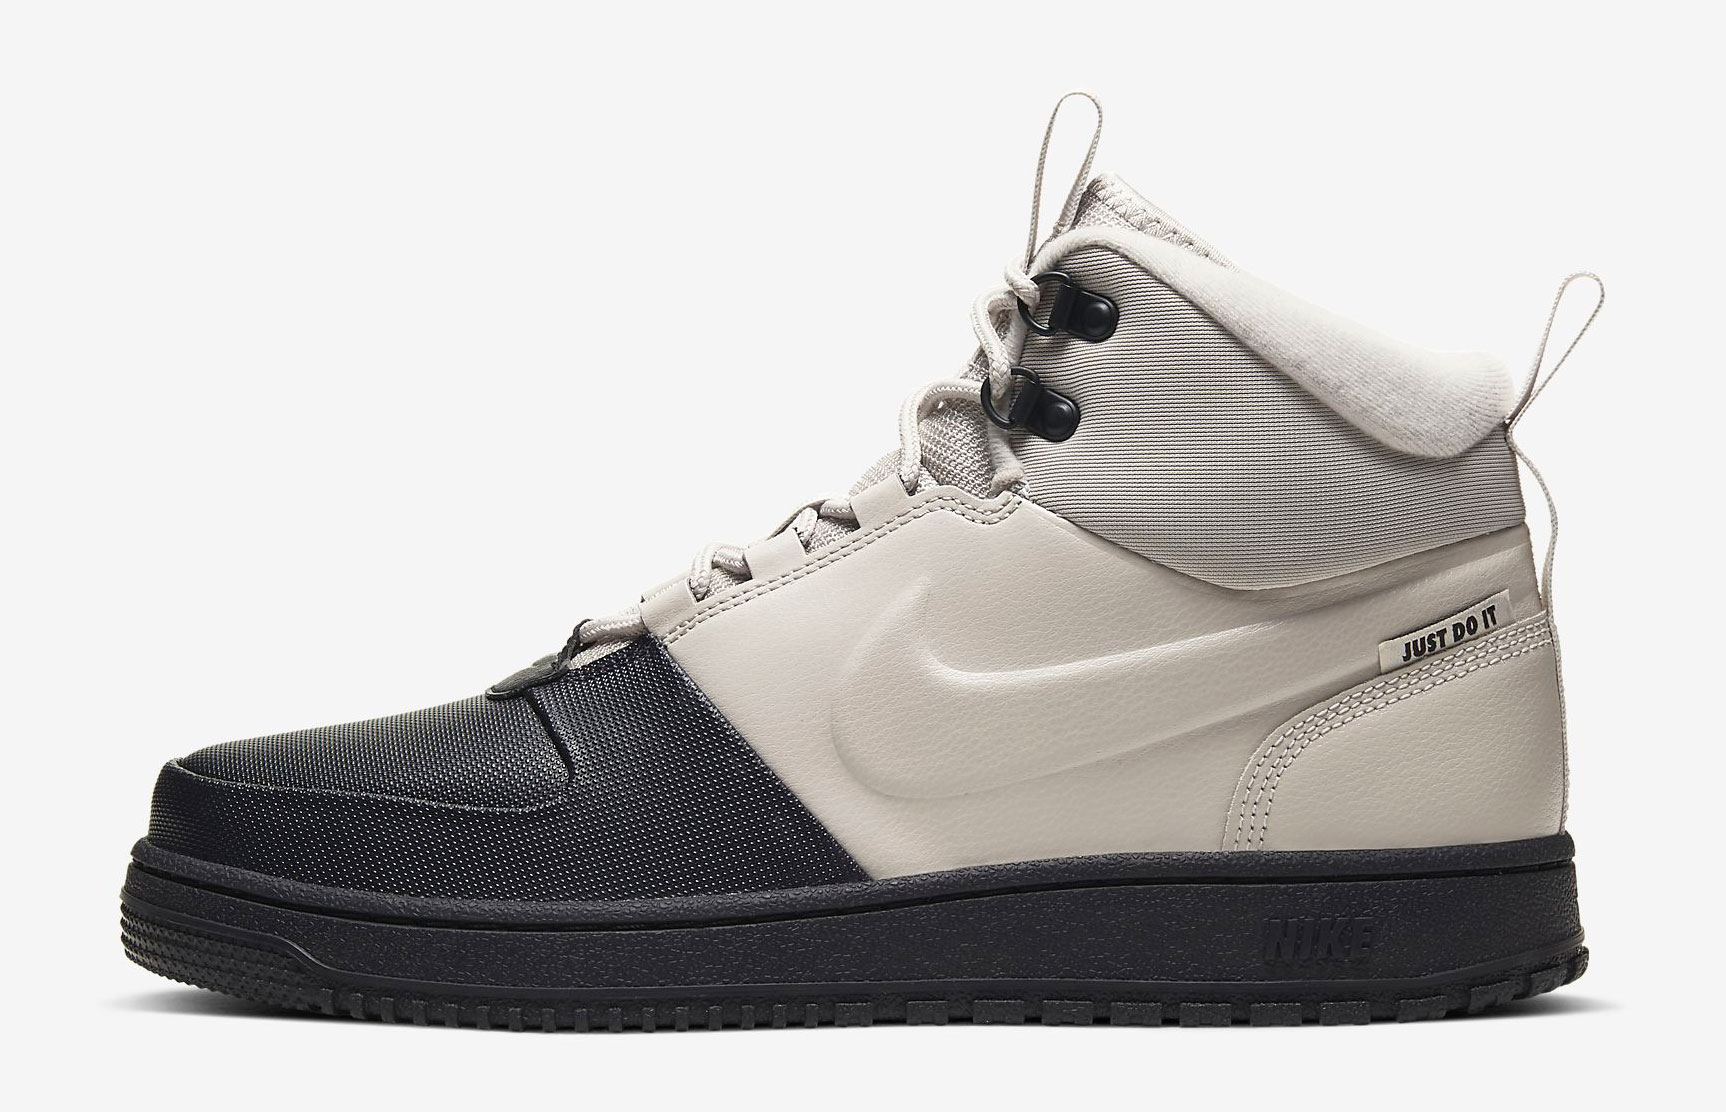 nike-path-winter-desert-sand-oil-grey-release-date-where-to-buy